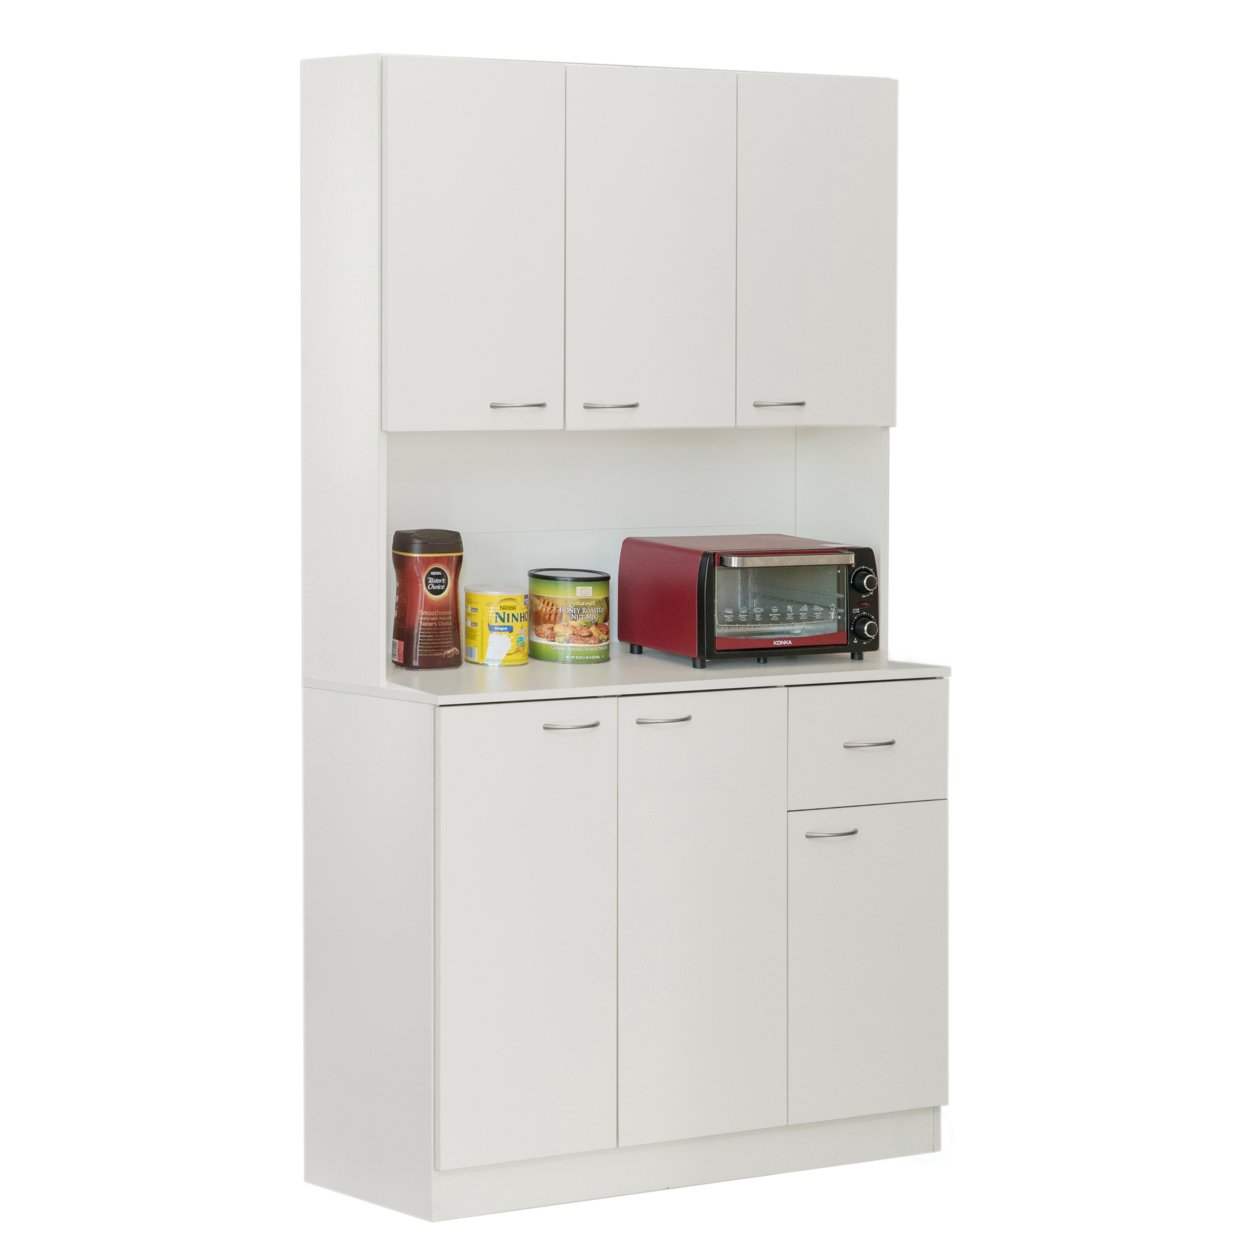 Basicwise QI004411L Wooden Kitchen Pantry Storage Cabinet with Drawer&#44; Doors and Shelves&#44; White